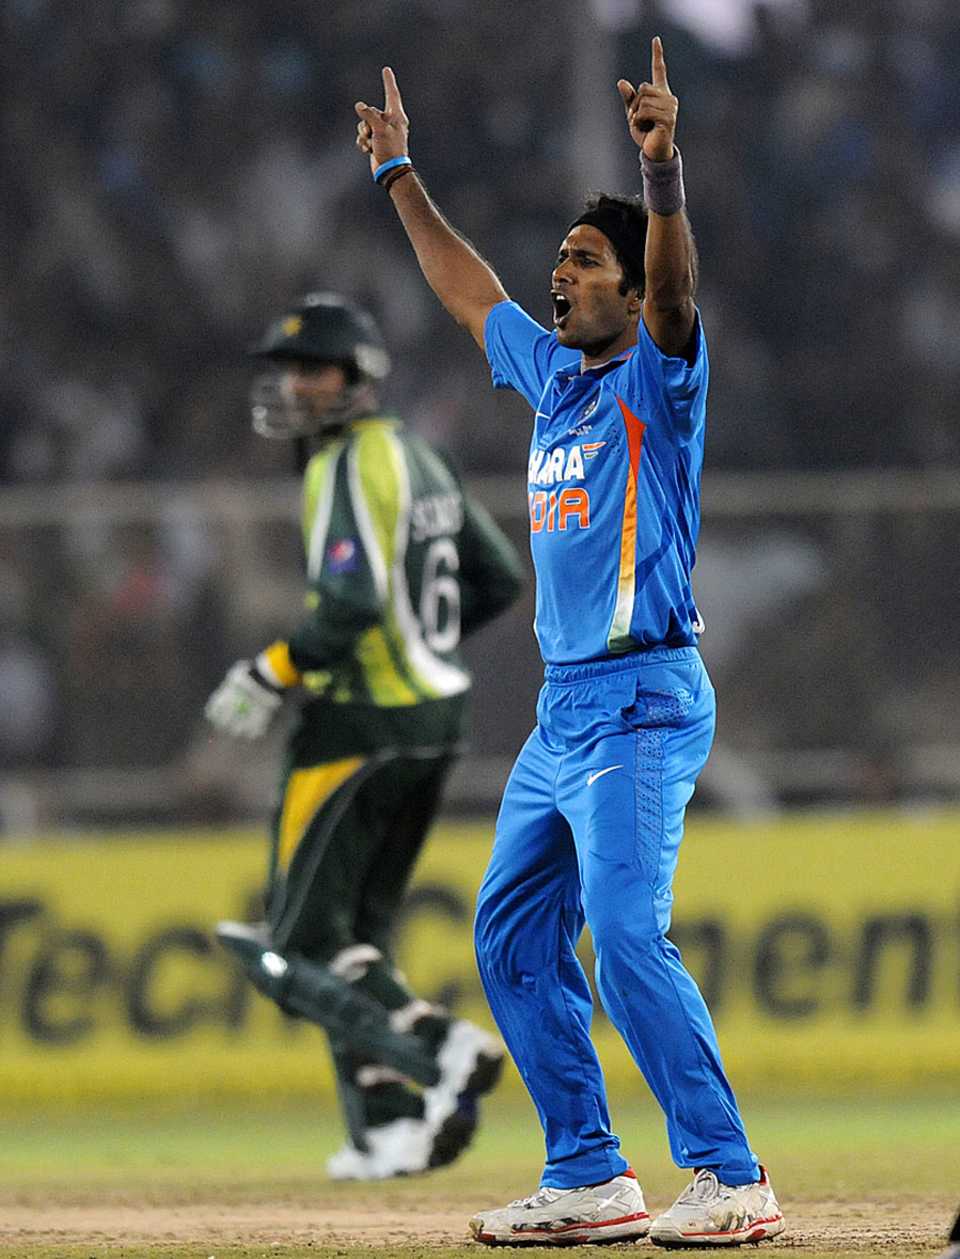 Ashok Dinda's three wickets were crucial in India's win